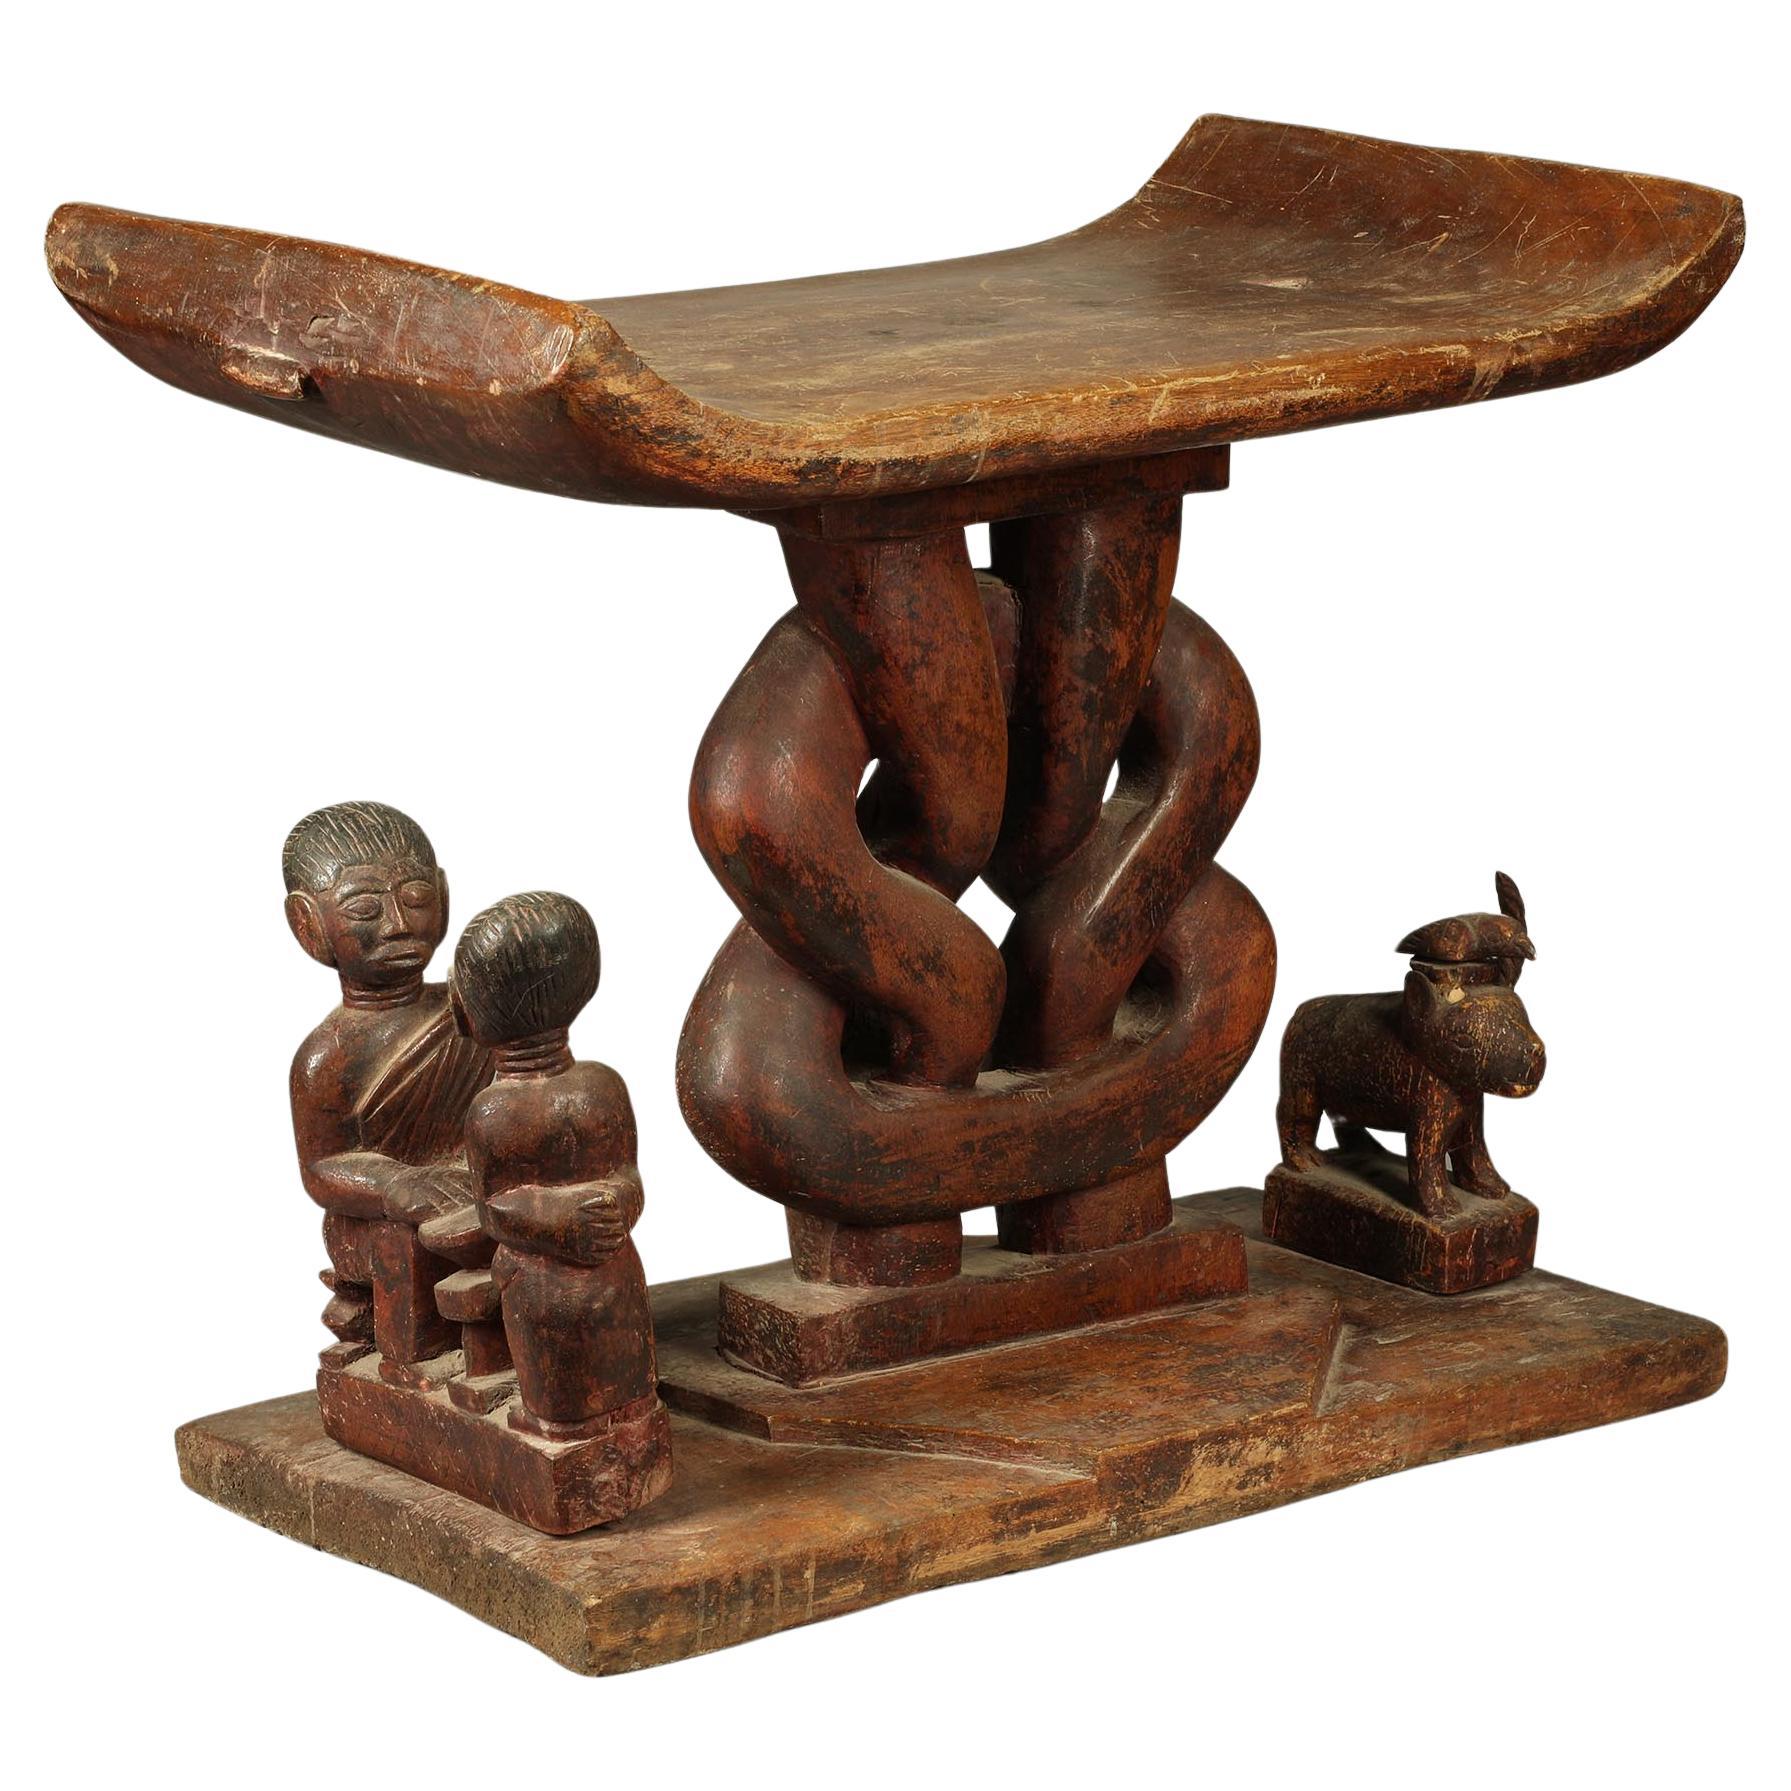 Old Classic Wood Ashanti Stool with King Figure & Endless Knot Mid-20th century